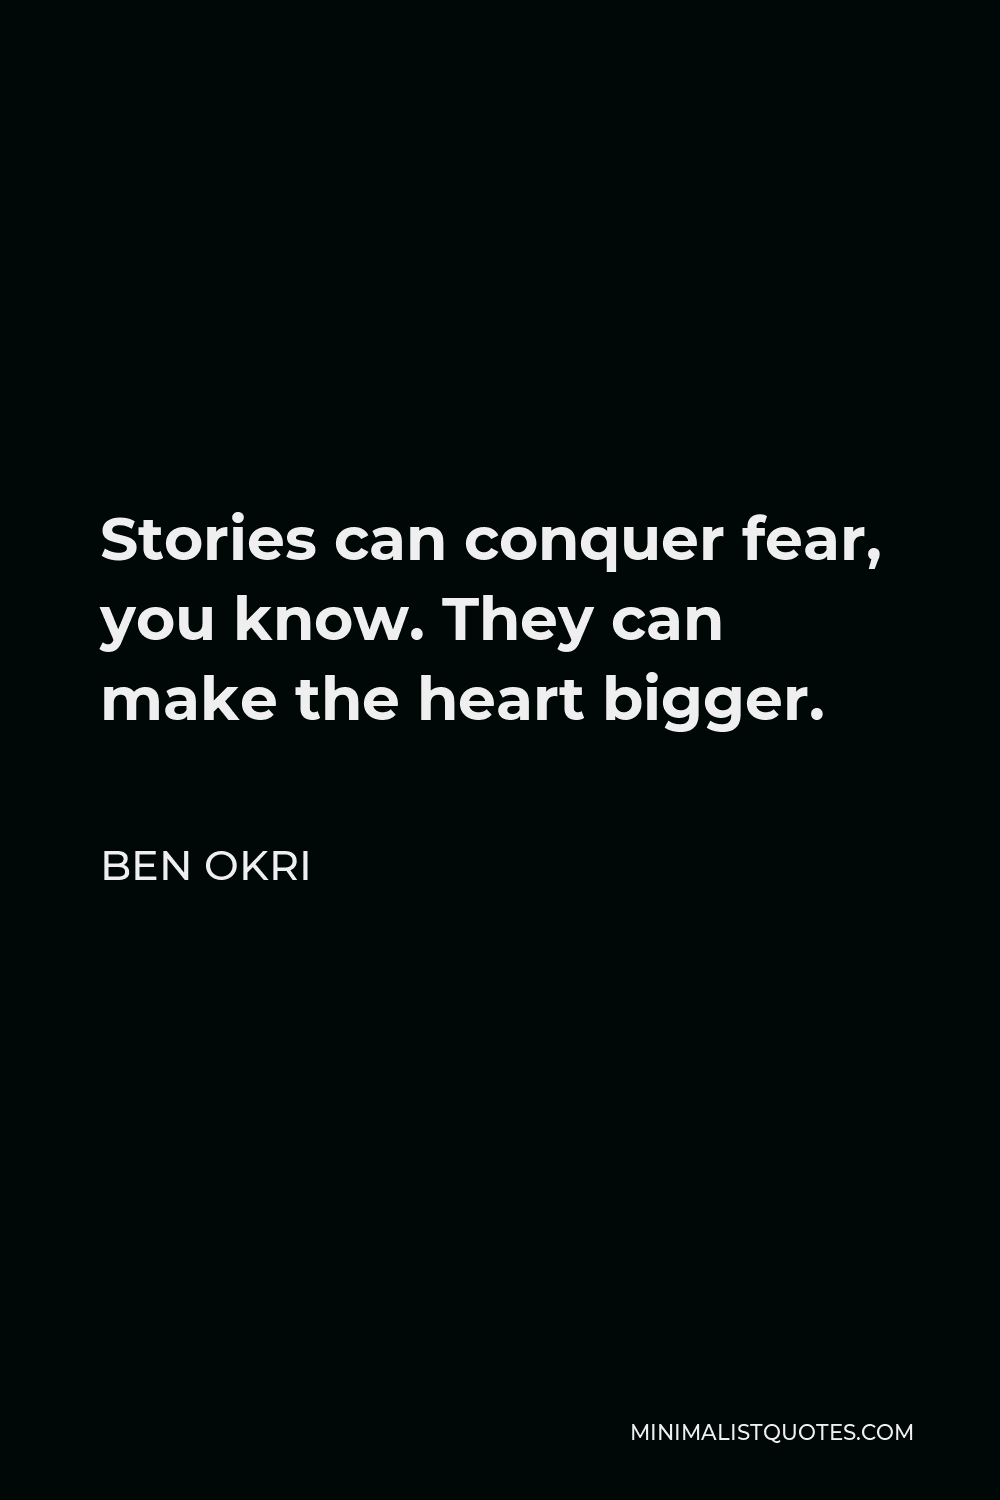 Ben Okri Quote - Stories can conquer fear, you know. They can make the heart bigger.